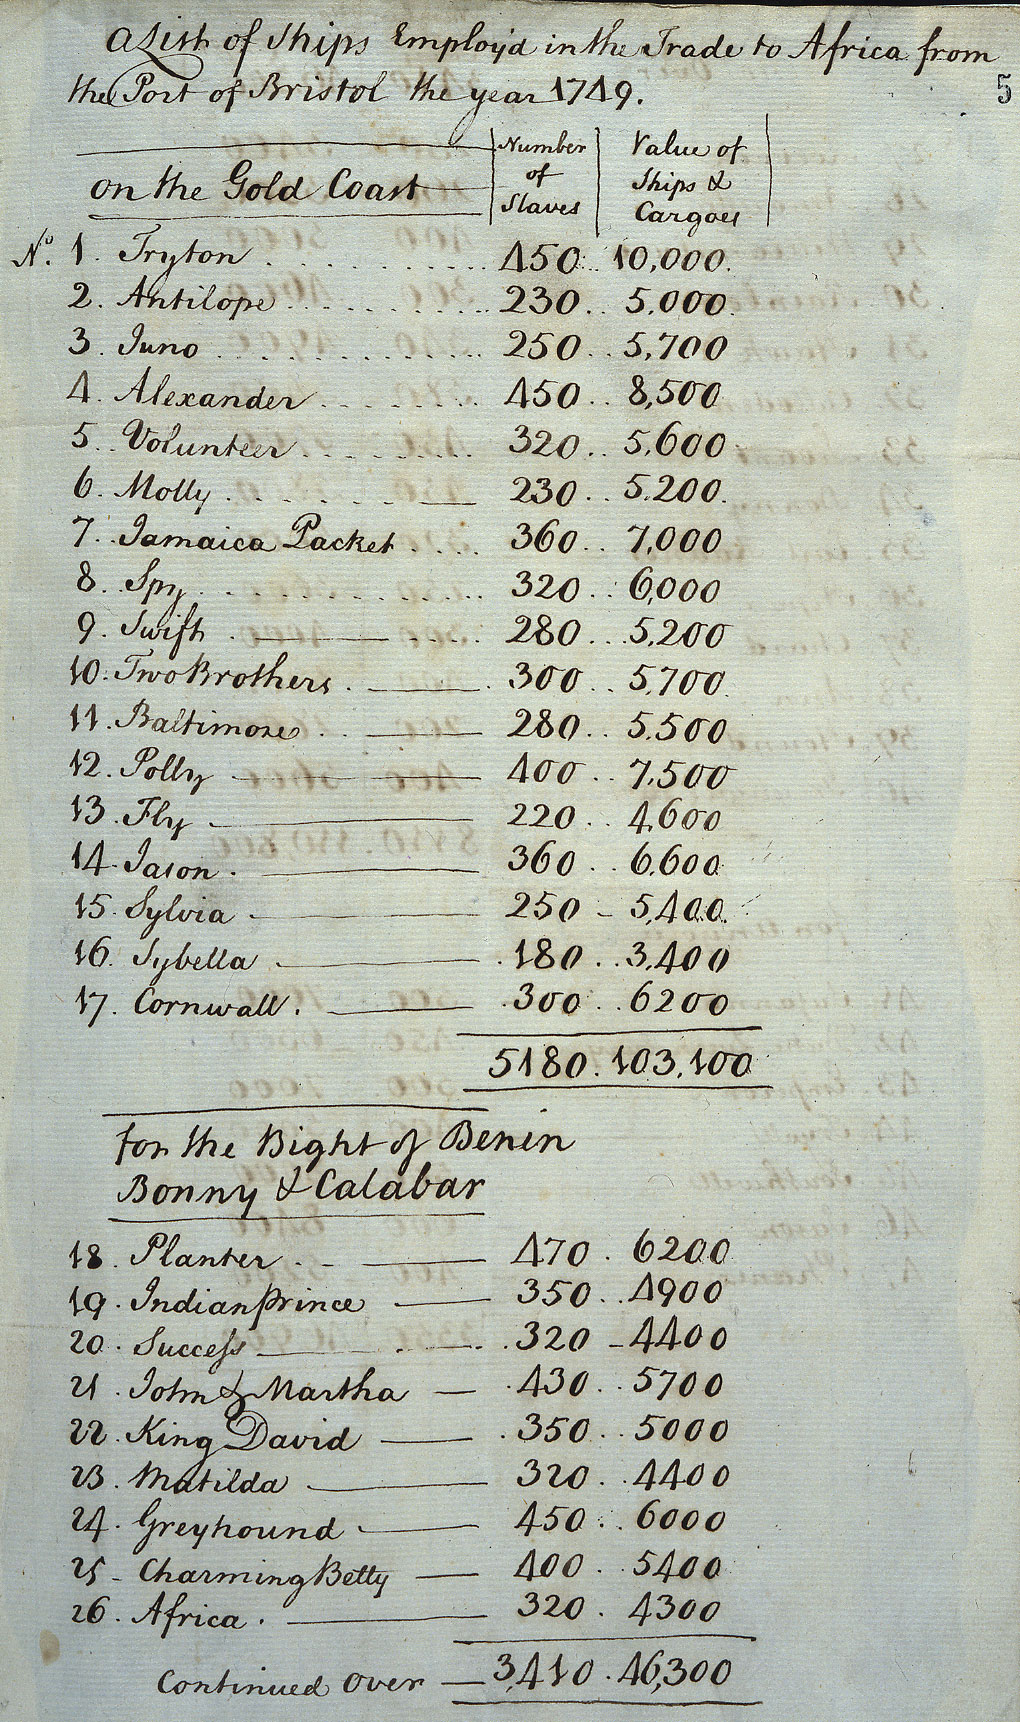 Ships employed in the Trade to Africa from the Port of Bristol, 1749 (CO 388/45 Pt 1 f.5)